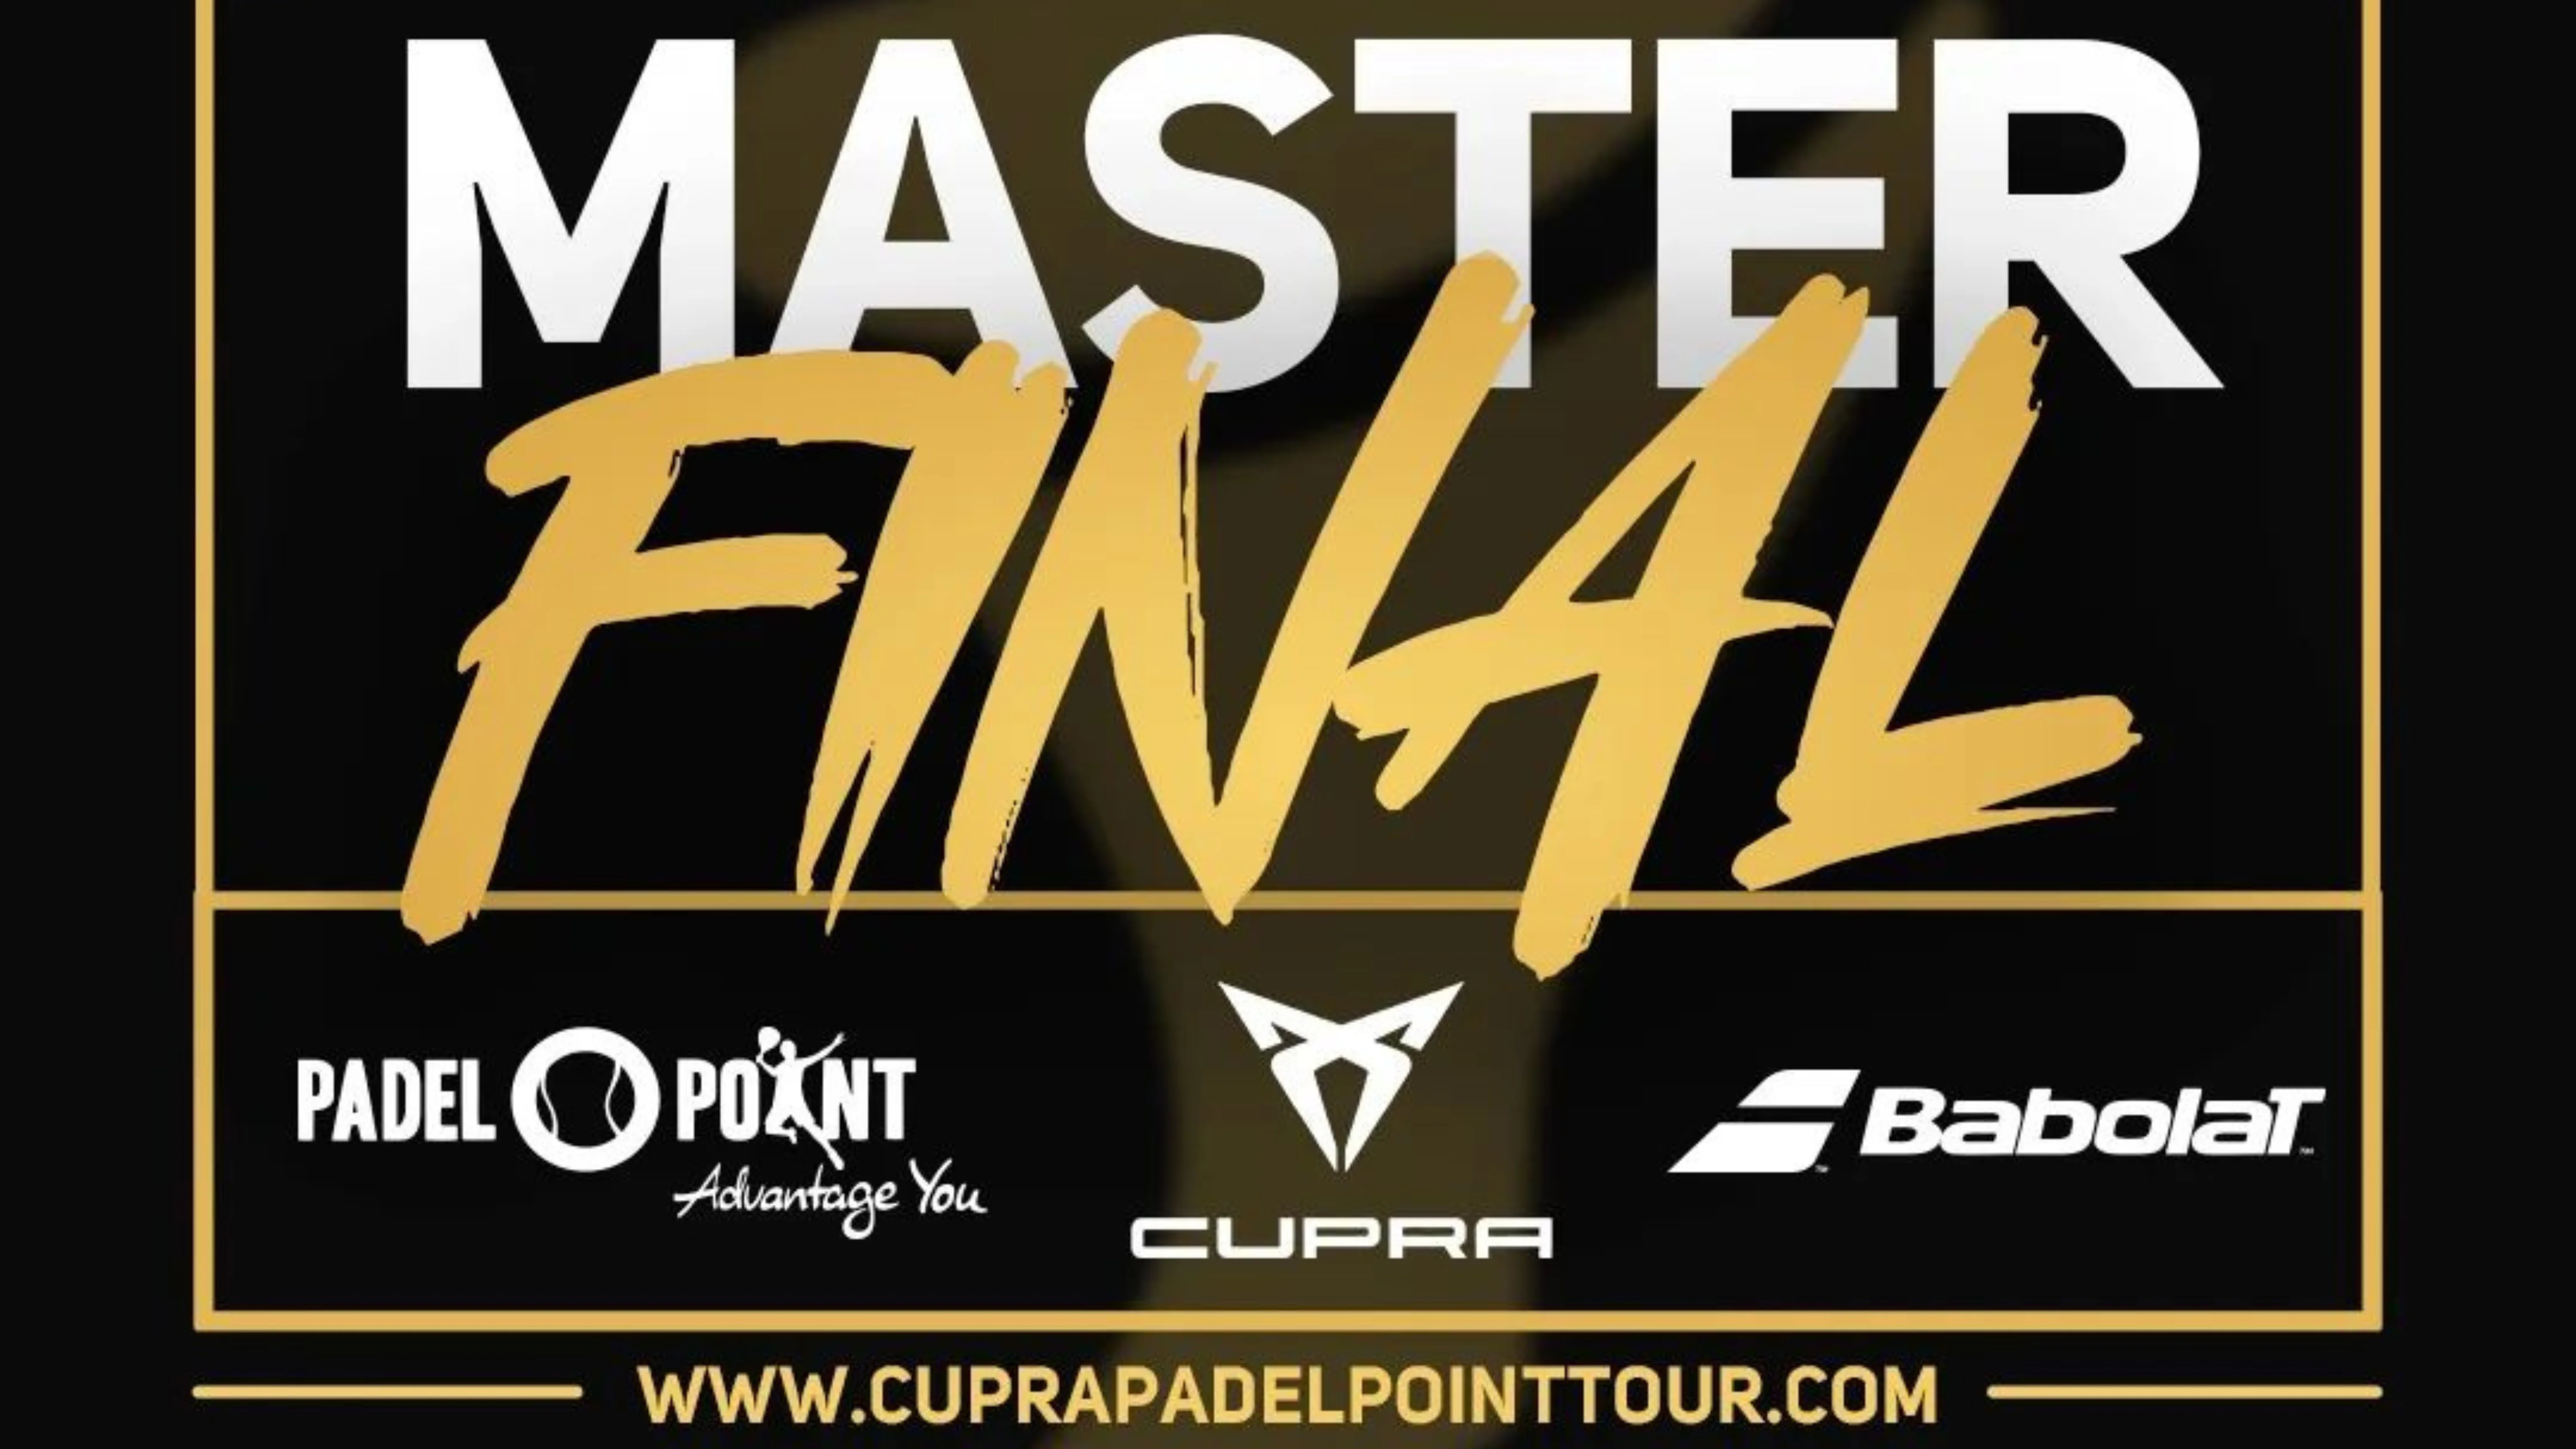 The Master Final Cupra Padel-Point Tour the 4PADEL Toulouse this weekend!